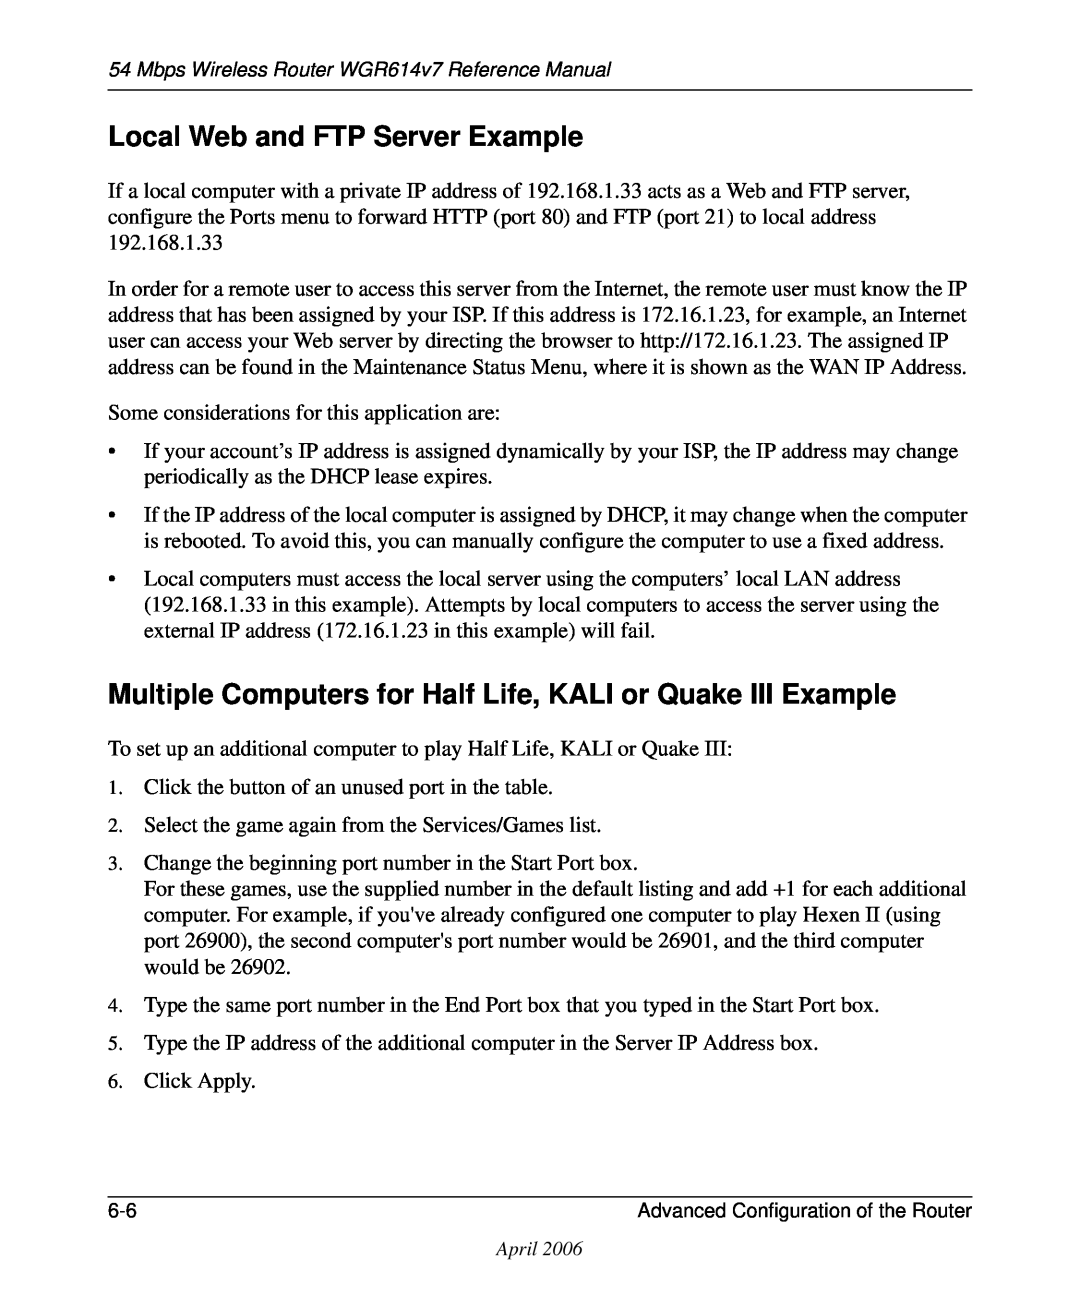 NETGEAR WGR614v7 manual Local Web and FTP Server Example, Multiple Computers for Half Life, KALI or Quake III Example 